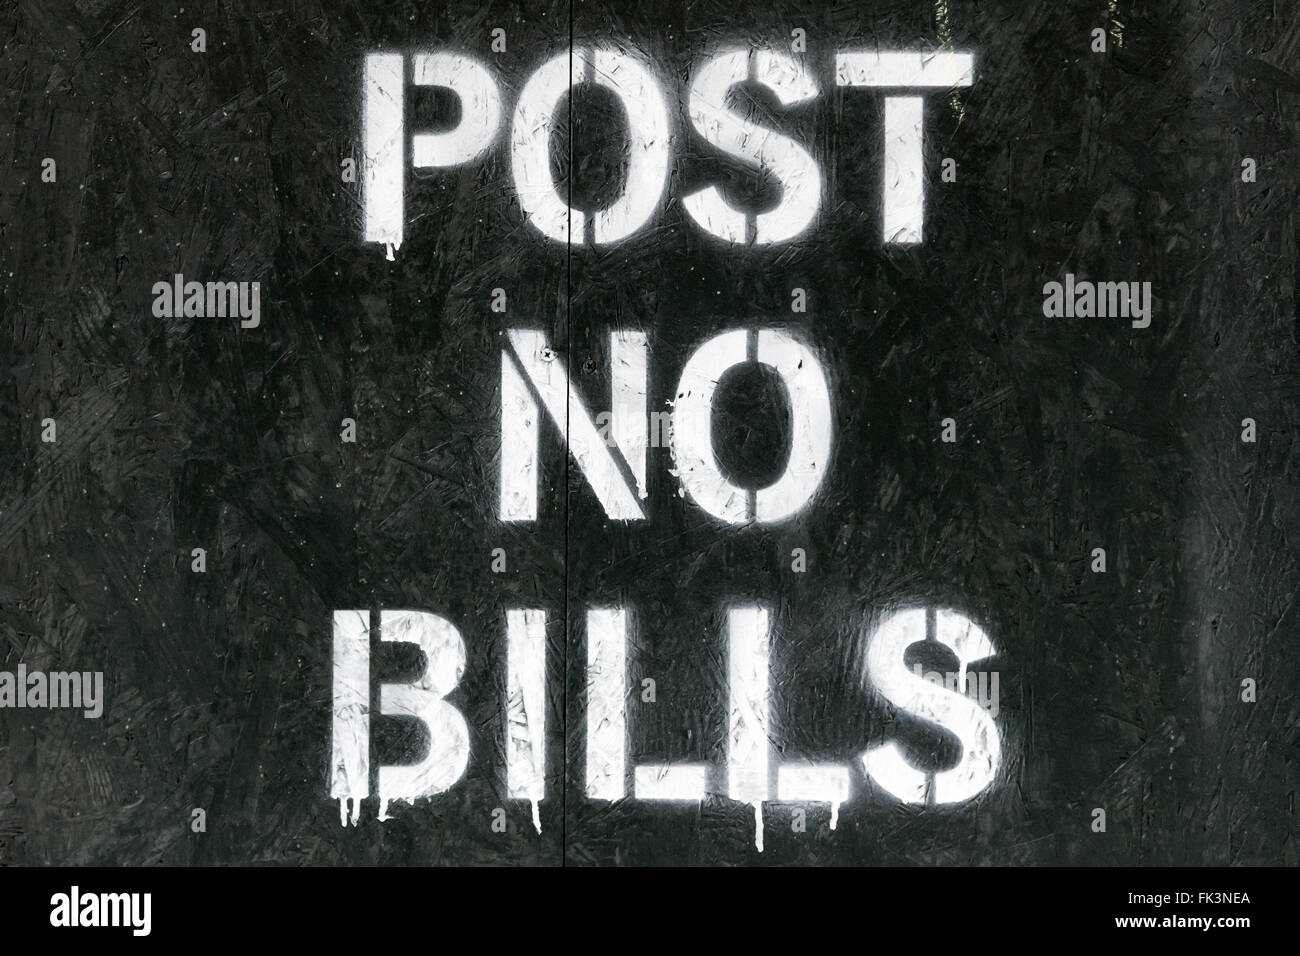 Post no bills spray painted sign in New York City Stock Photo